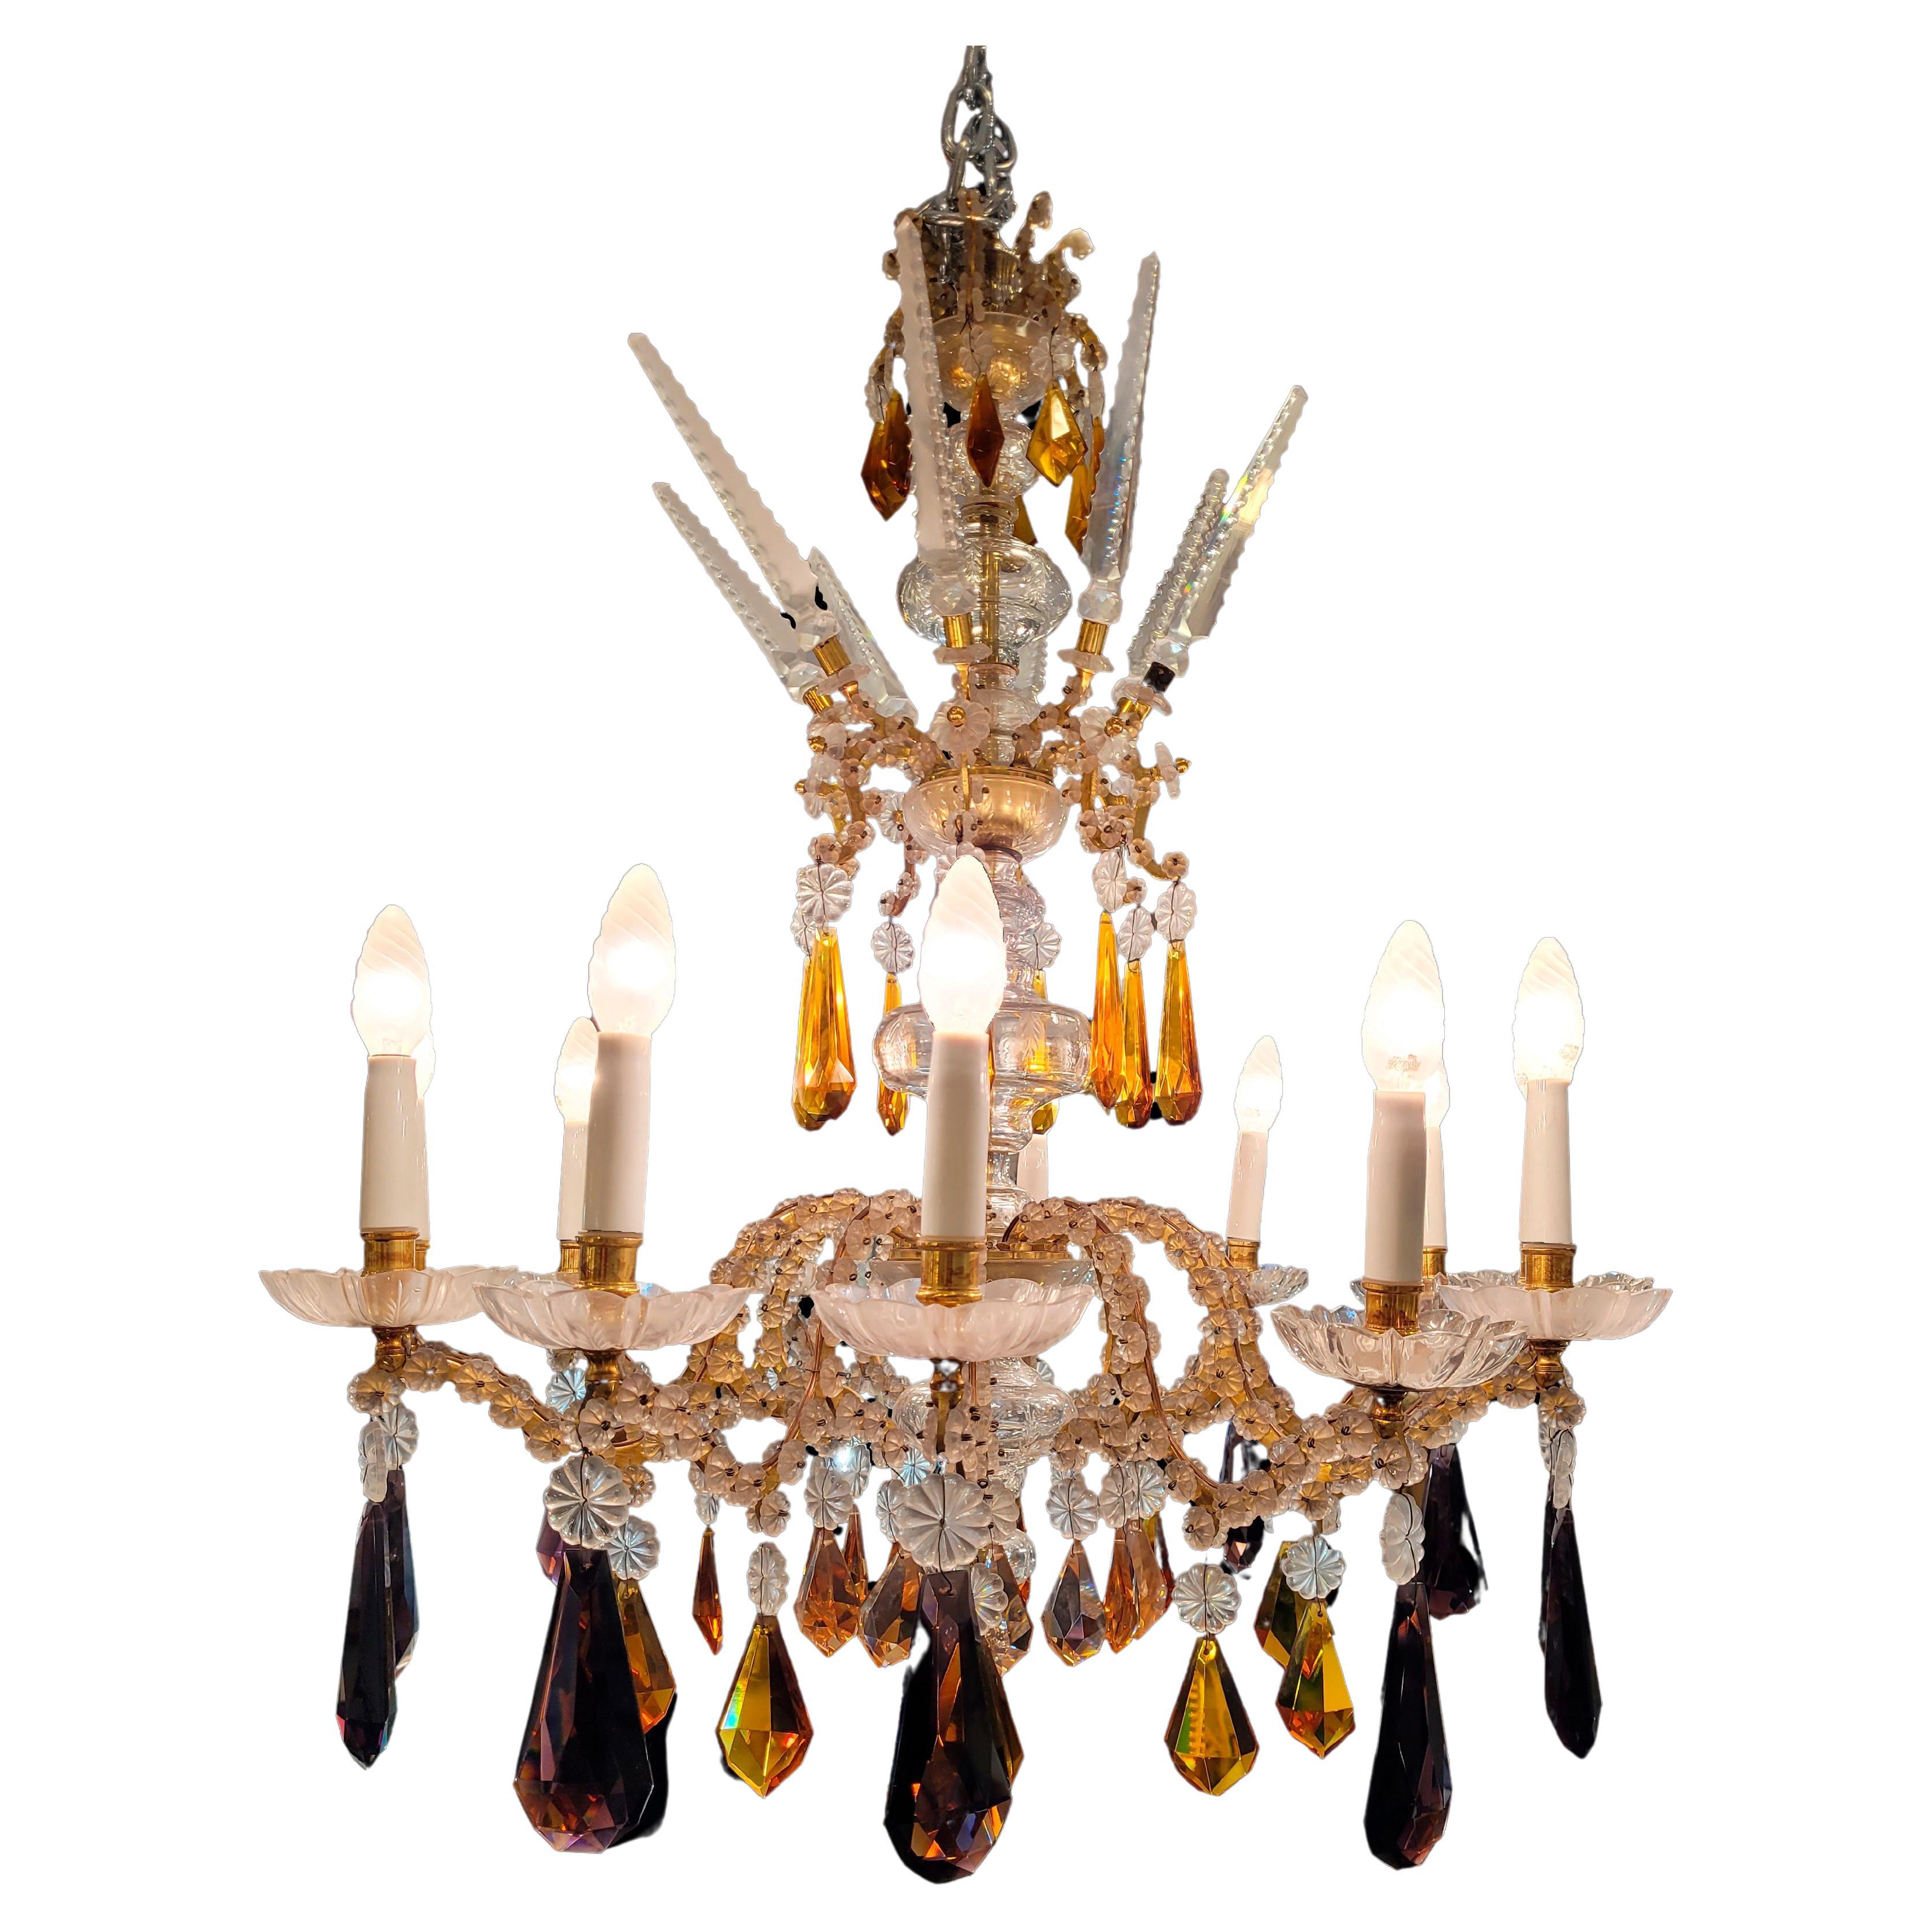 Italian Chandelier 40s in cut glass in purple and amber colors